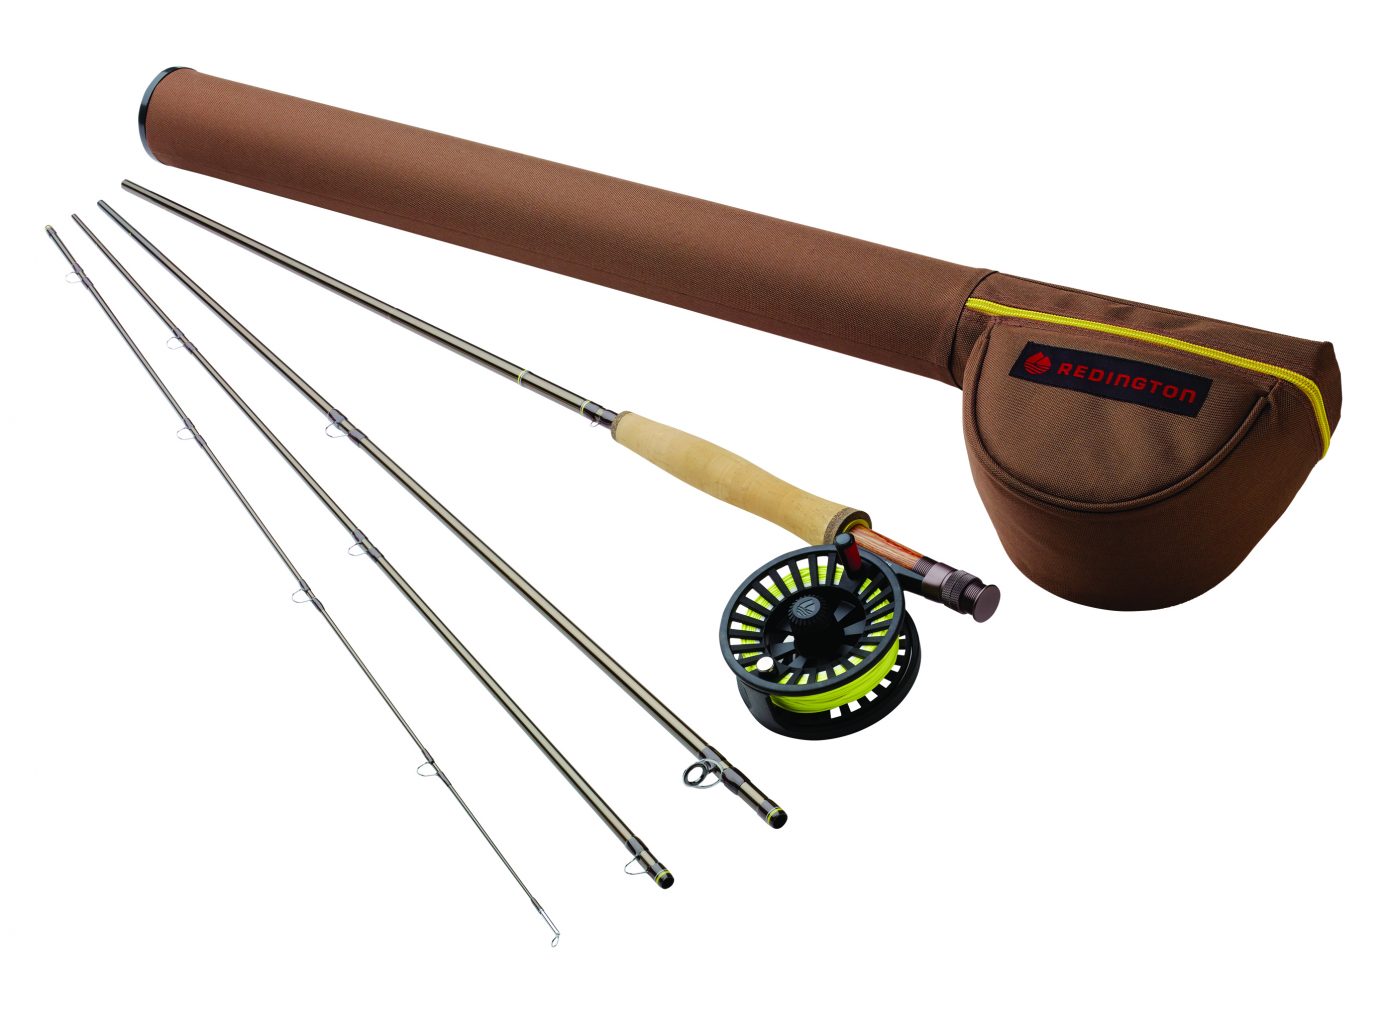 Redington Dually 8-weight 11 9 Fly Rod with $25 gift card 